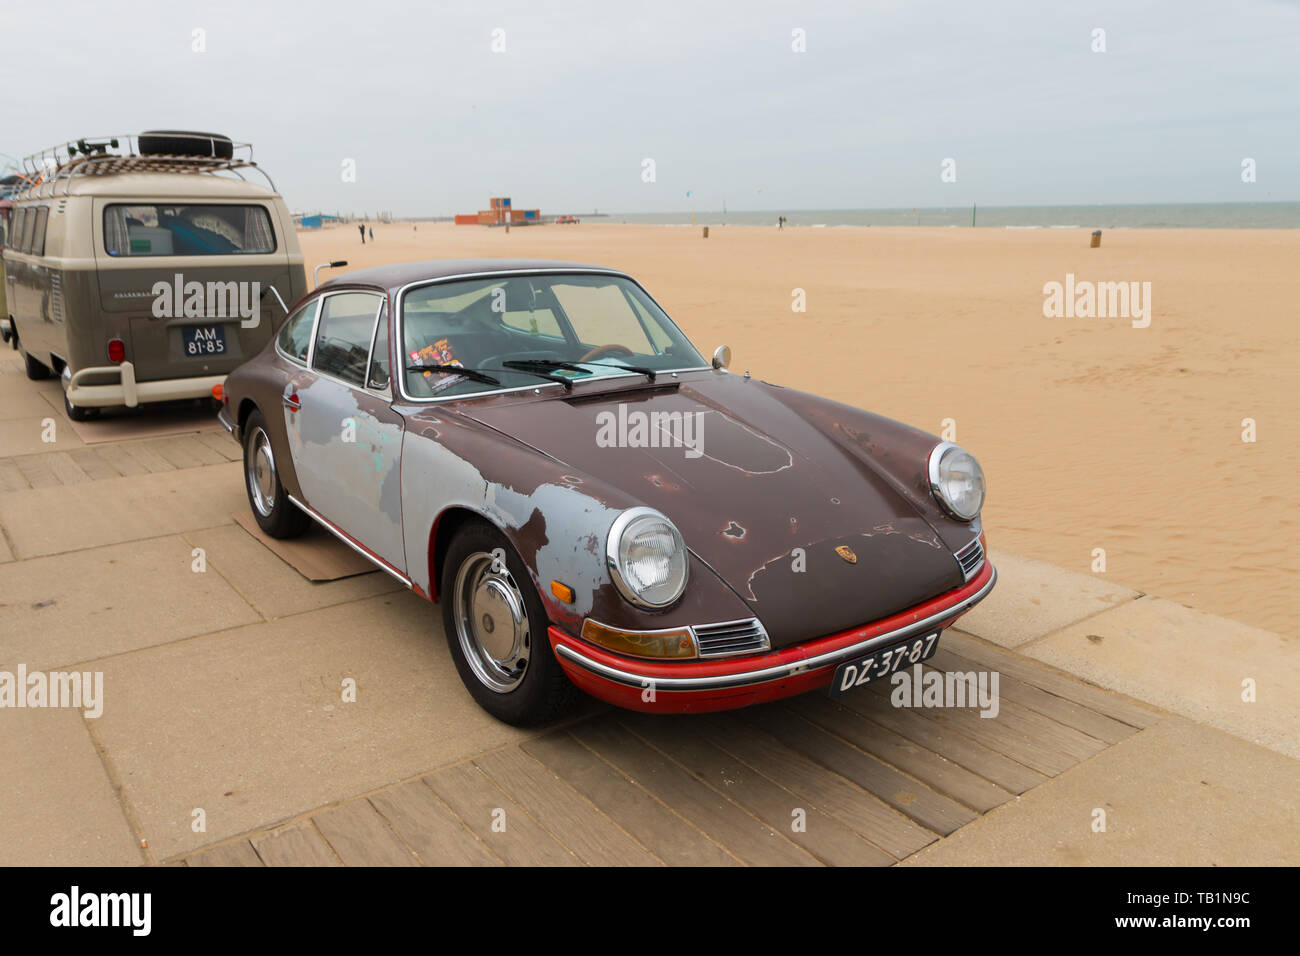 The Hague, the Netherlands - May 26 2019: classic Porsche model 912 with rat look parked at the air cooled motor show at Scheveningen Stock Photo